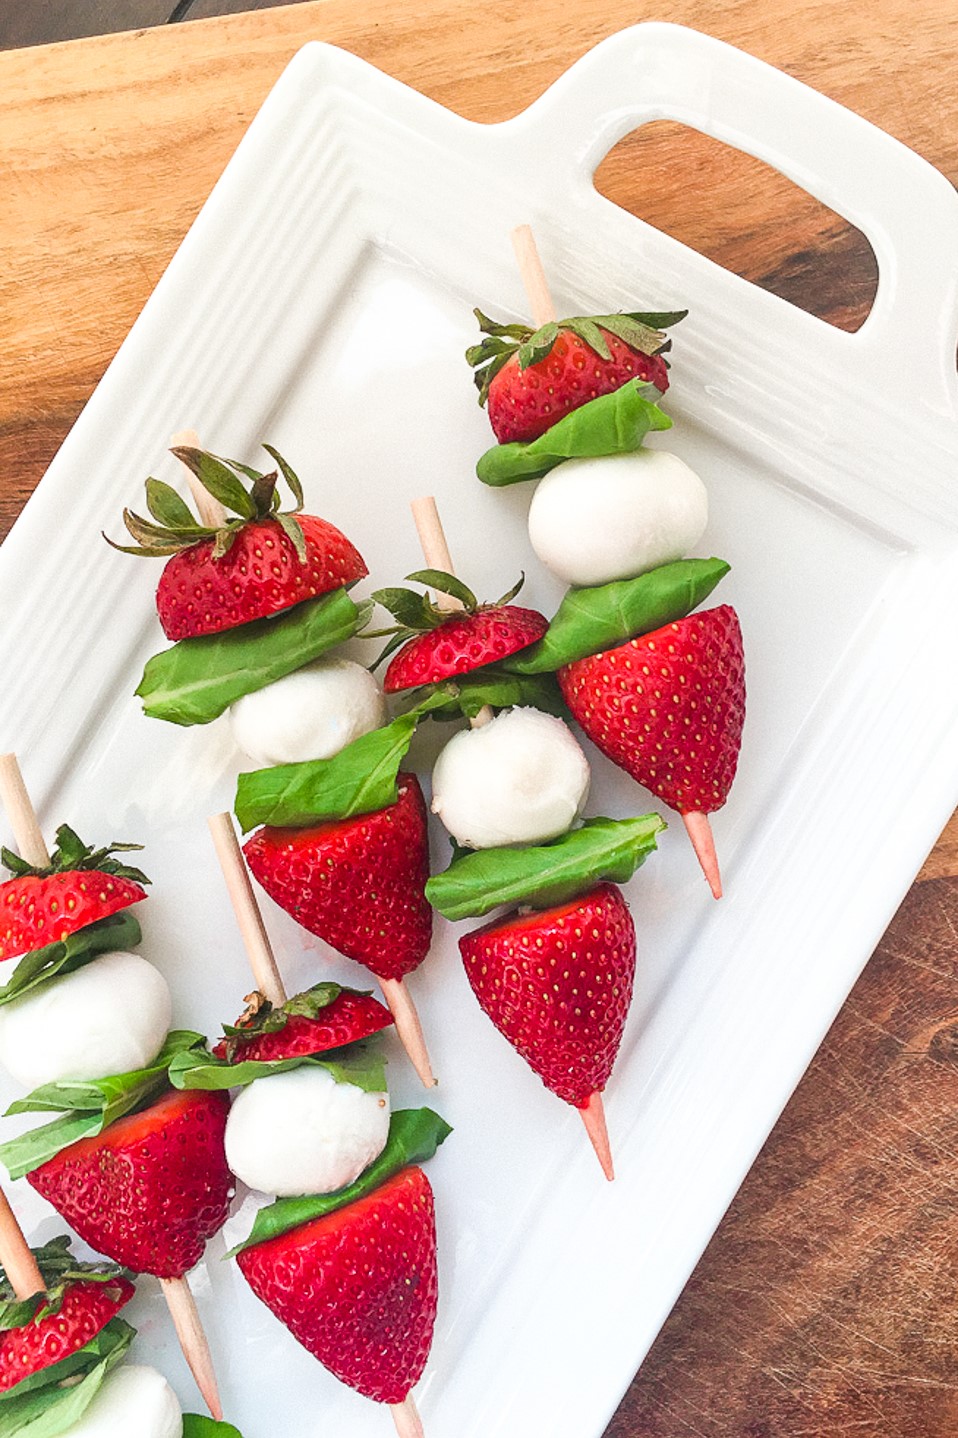 A summer party or dinner idea, these strawberry caprese skewers drizzled in balsamic glaze are perfect appetizers for a party!